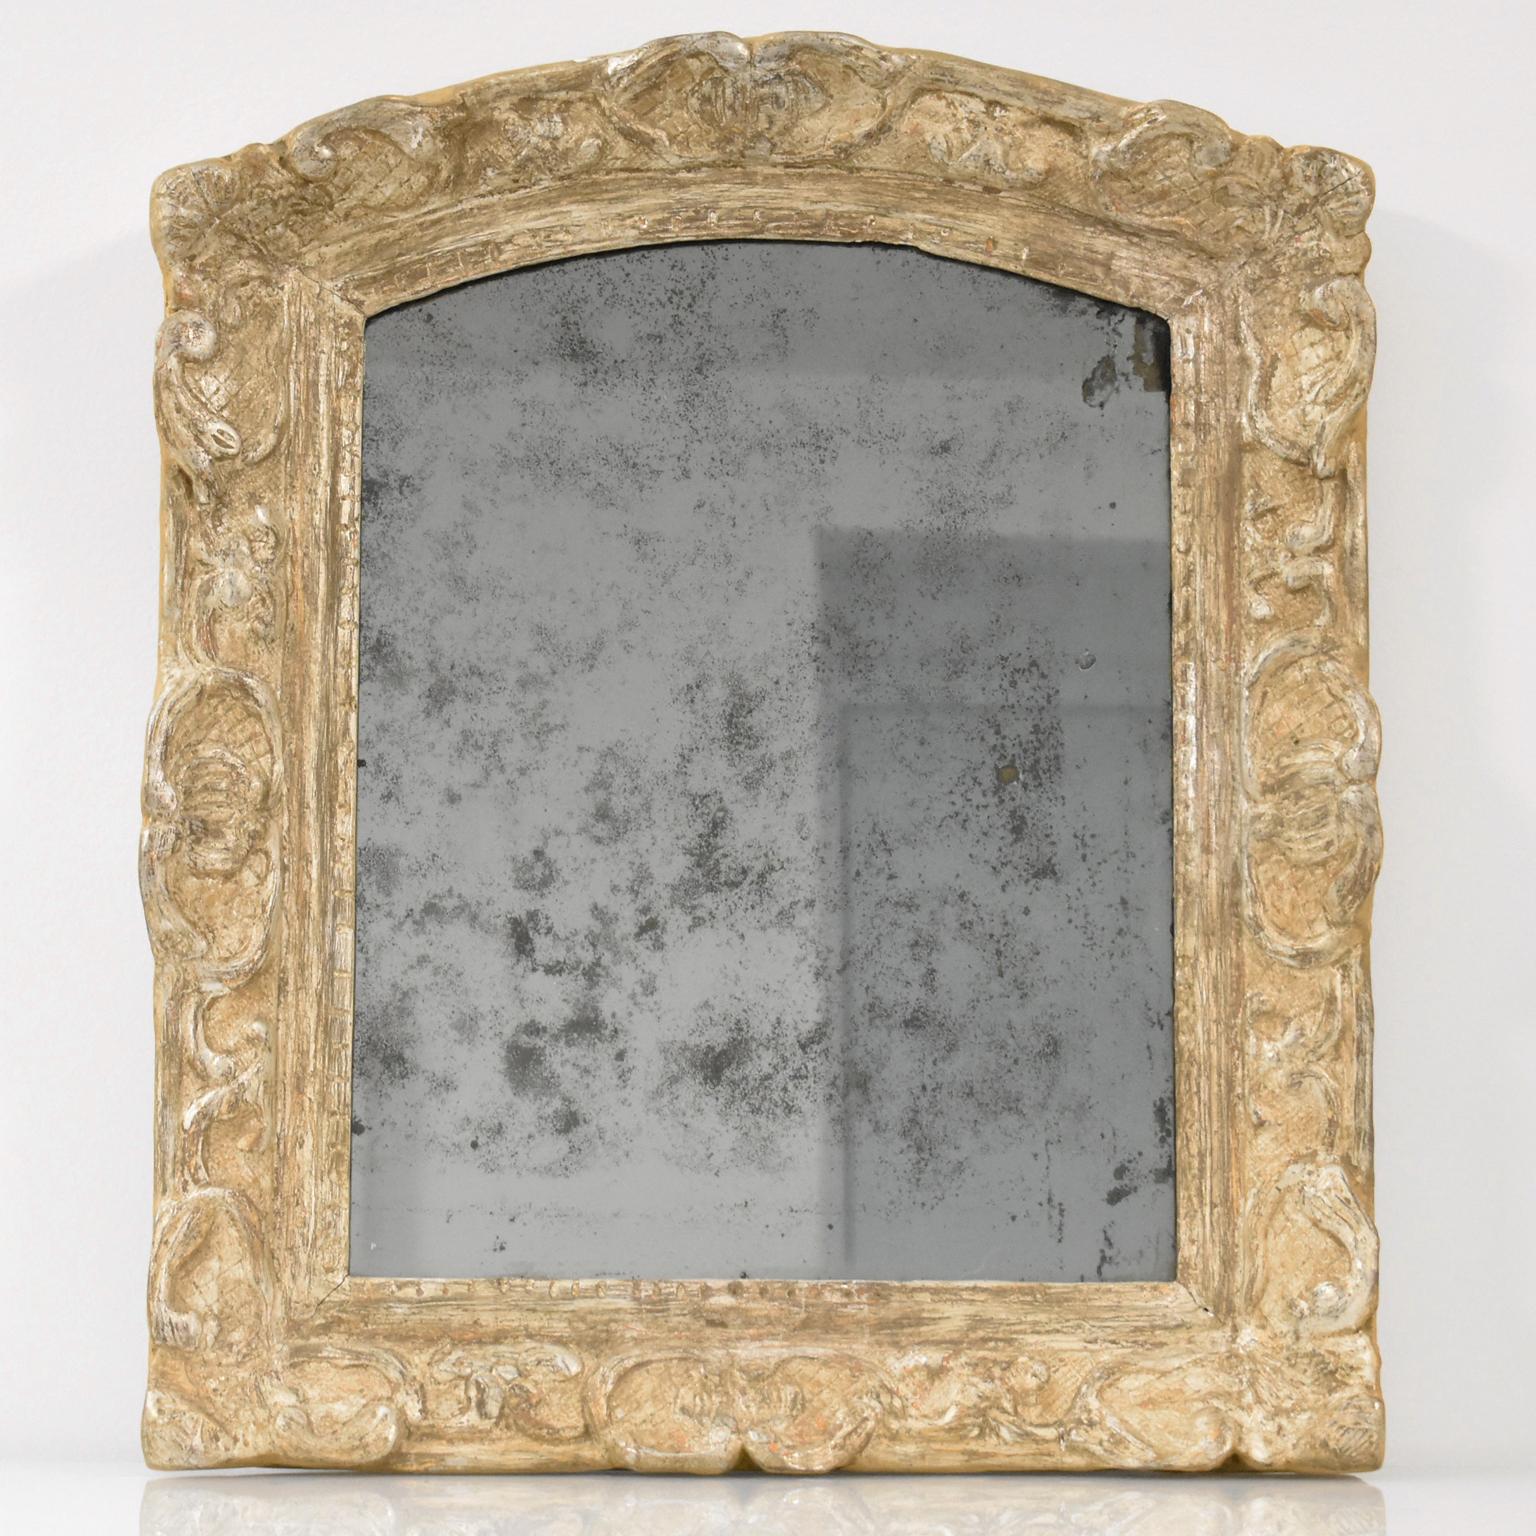 This museum-quality elegant hand-carved oak wall mirror was crafted in France in the 17th century. The piece boasts a high-quality Louis XIV period framing with silver leaf gilding in 